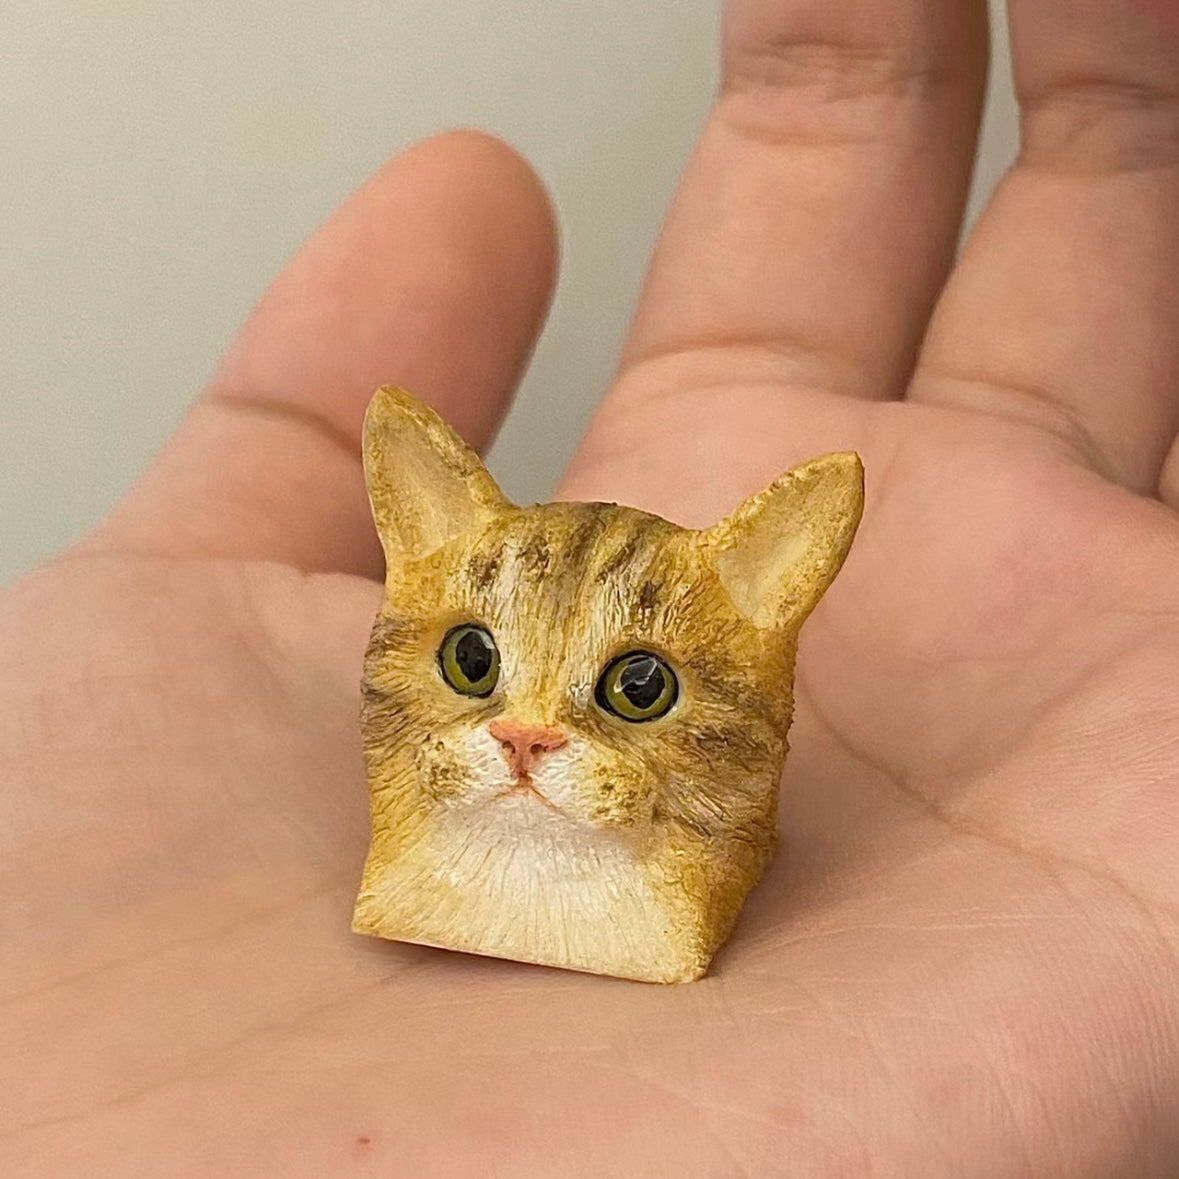 Artisan keycaps for cats and dogs, you can send us a picture of your pet and we customize the keycaps exclusively for you belonging to him, which can be used as a gift.